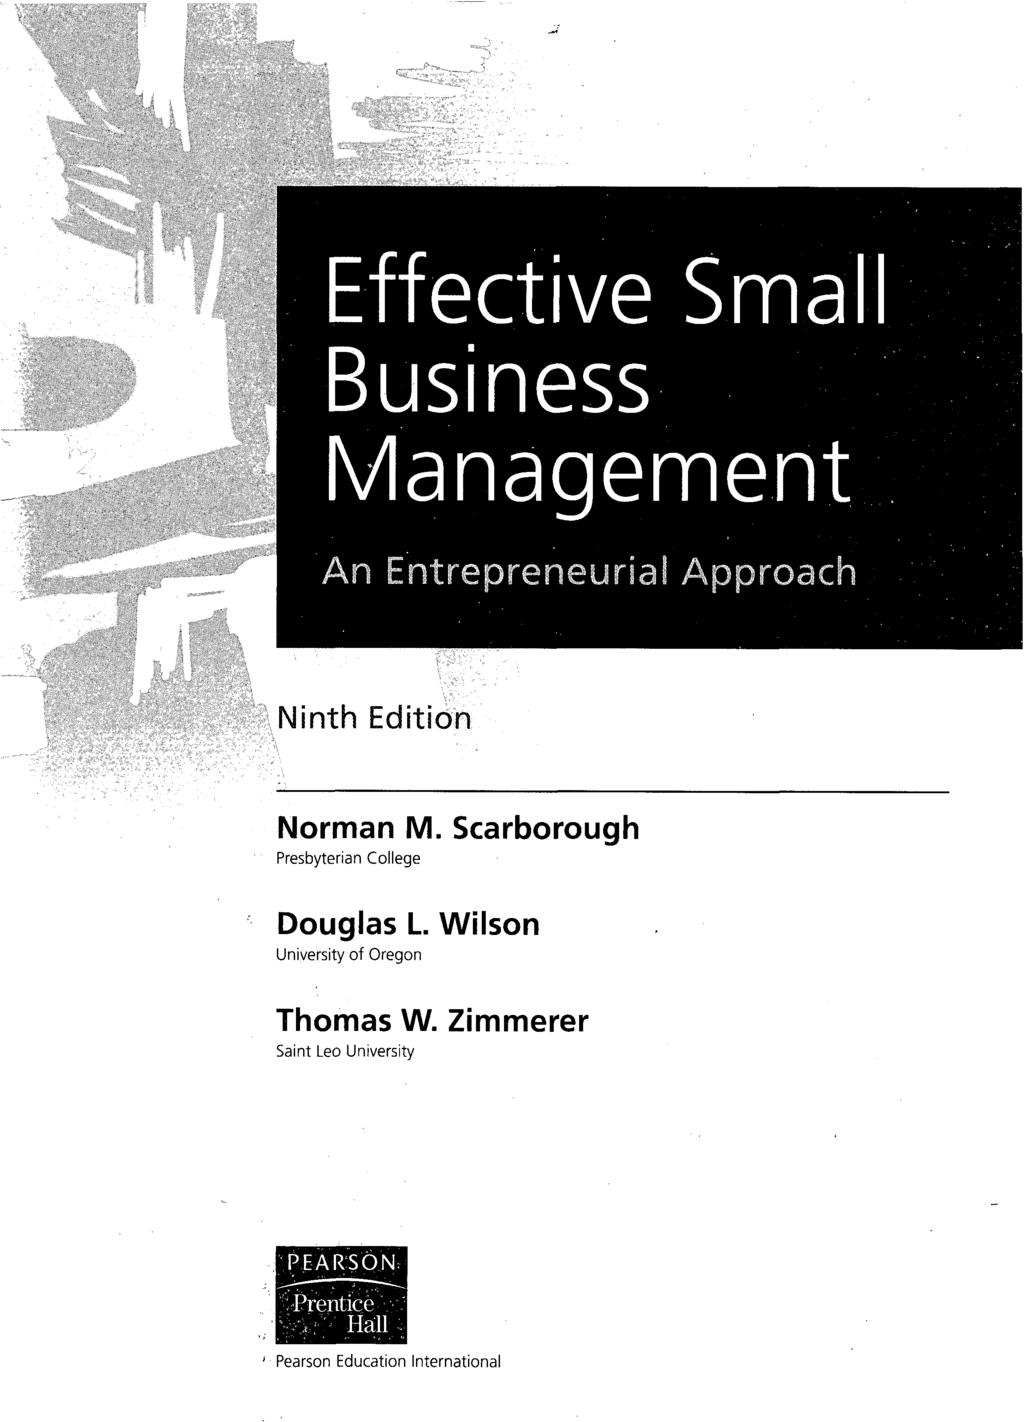 Effective Small Business Management An Entrepreneurial Accroach Ninth Edition Norman M.